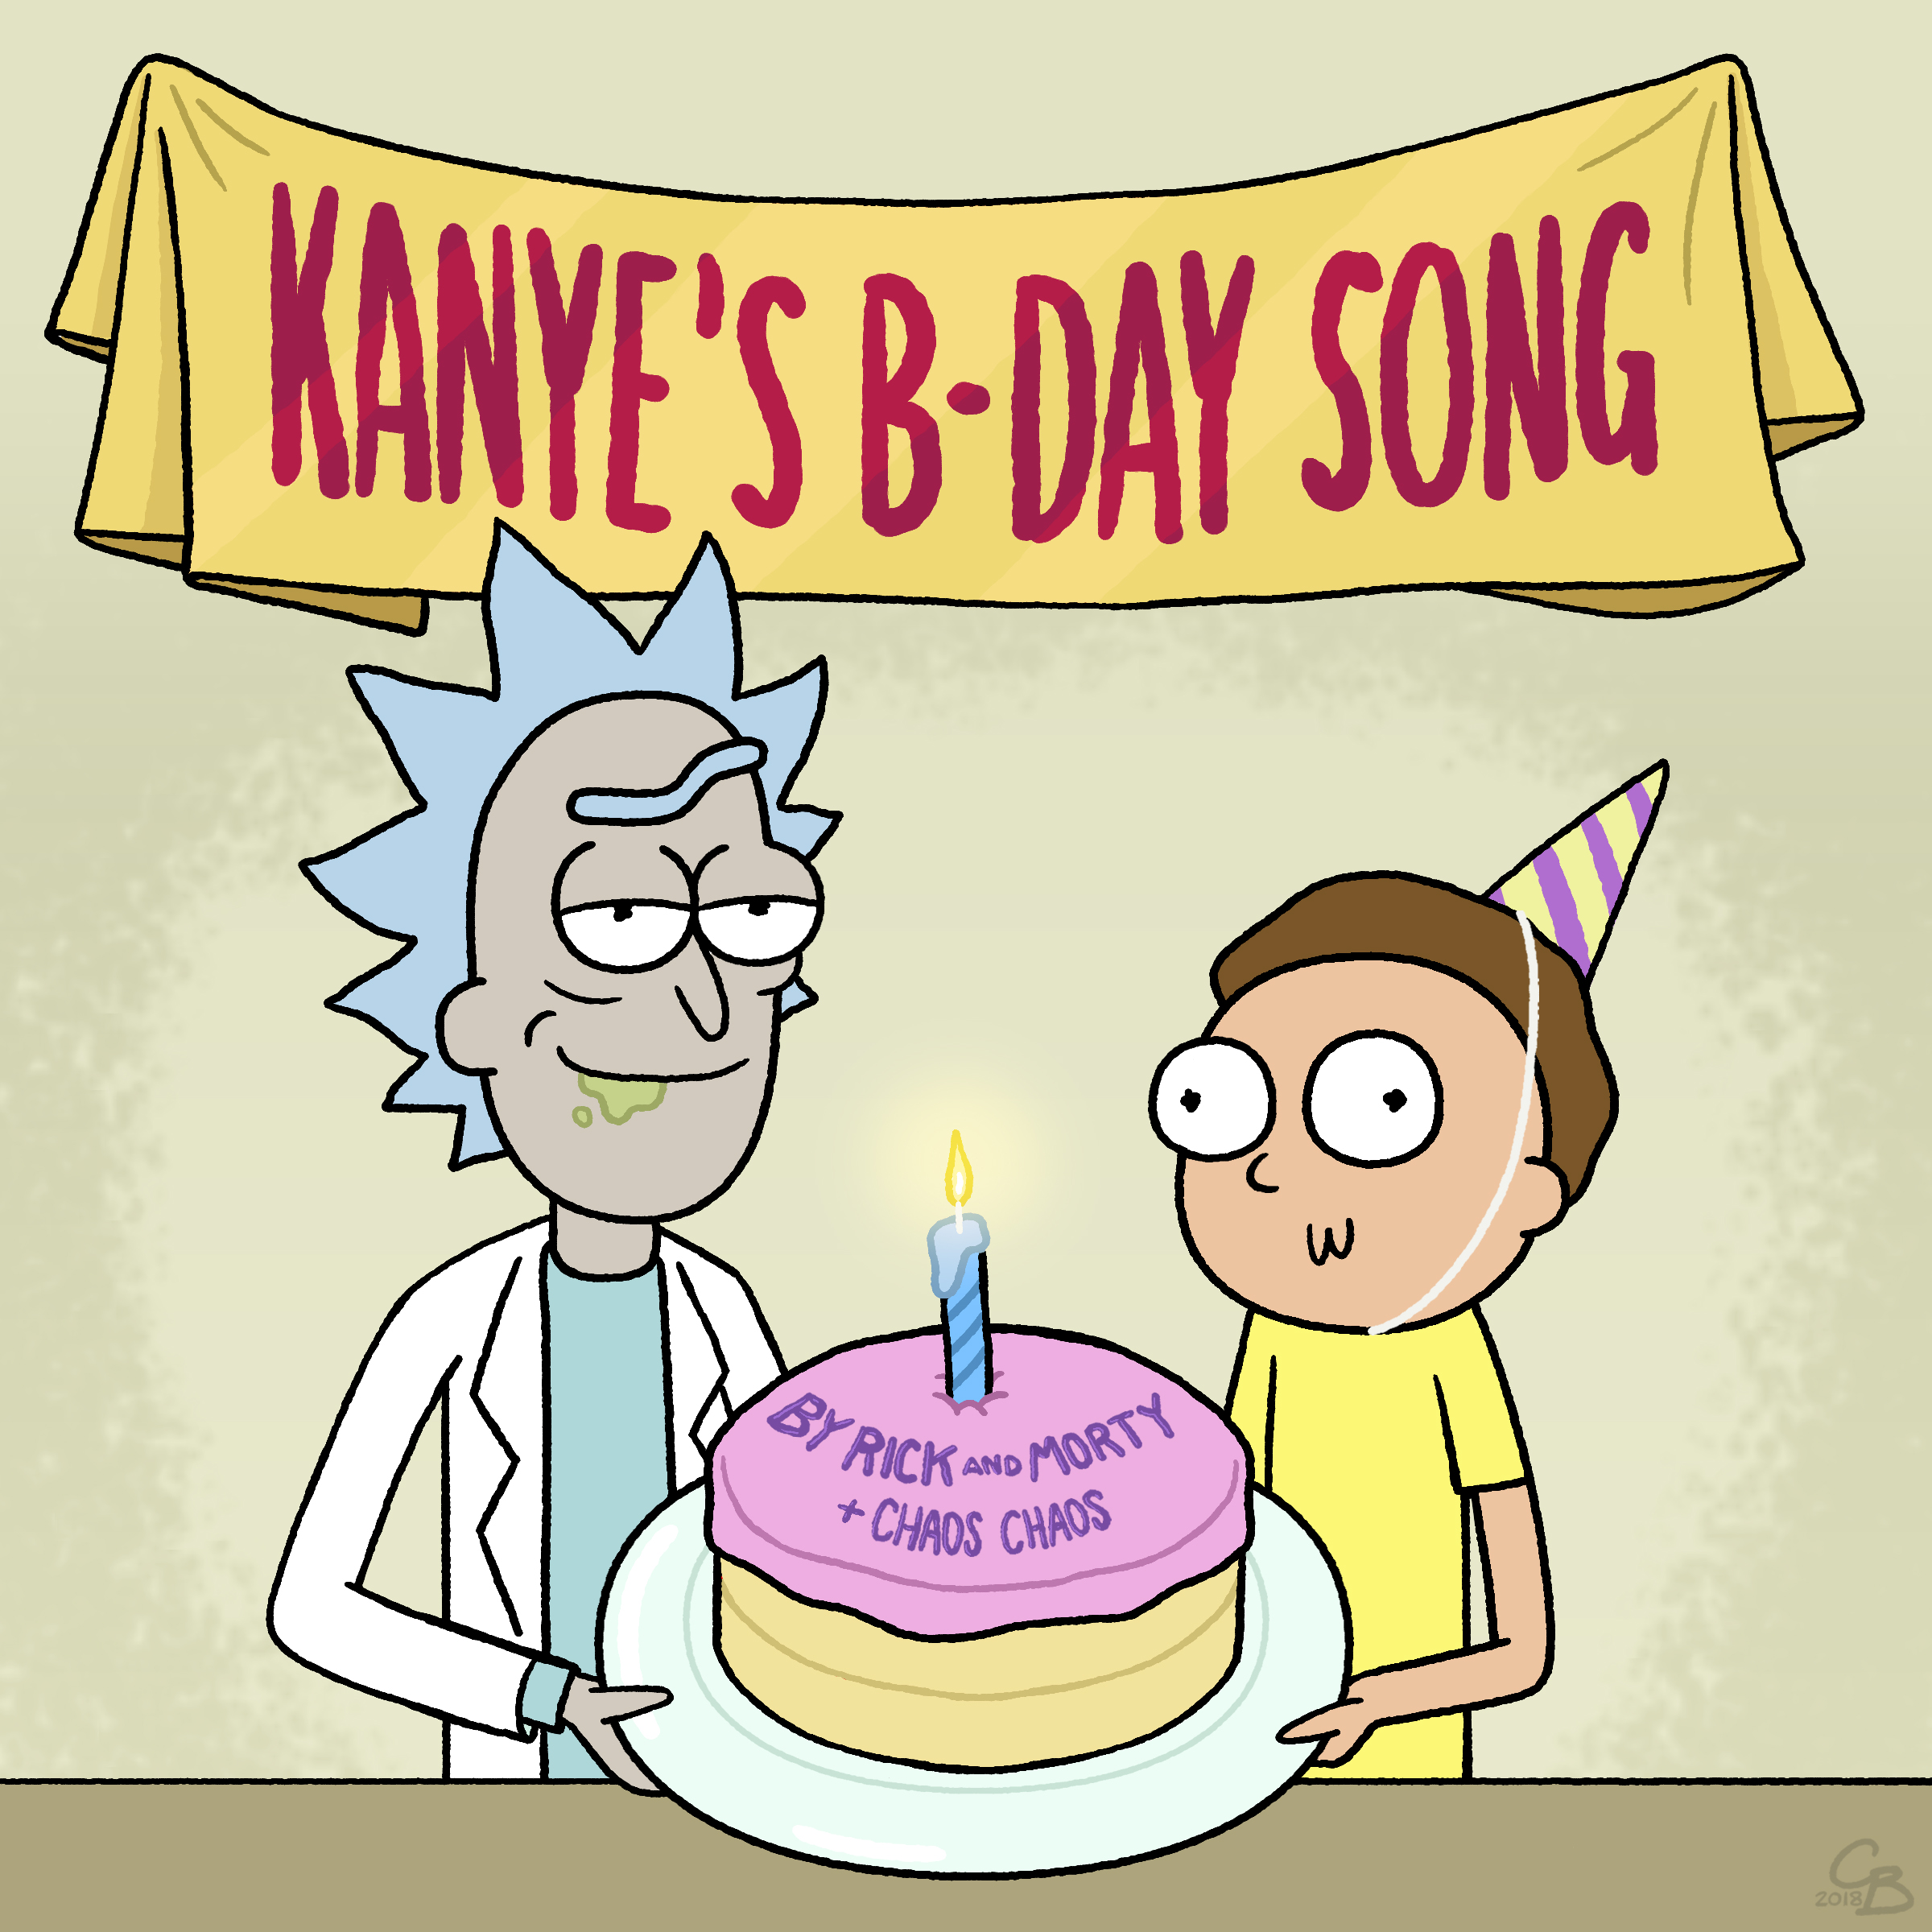 Kanye's B-Day Song